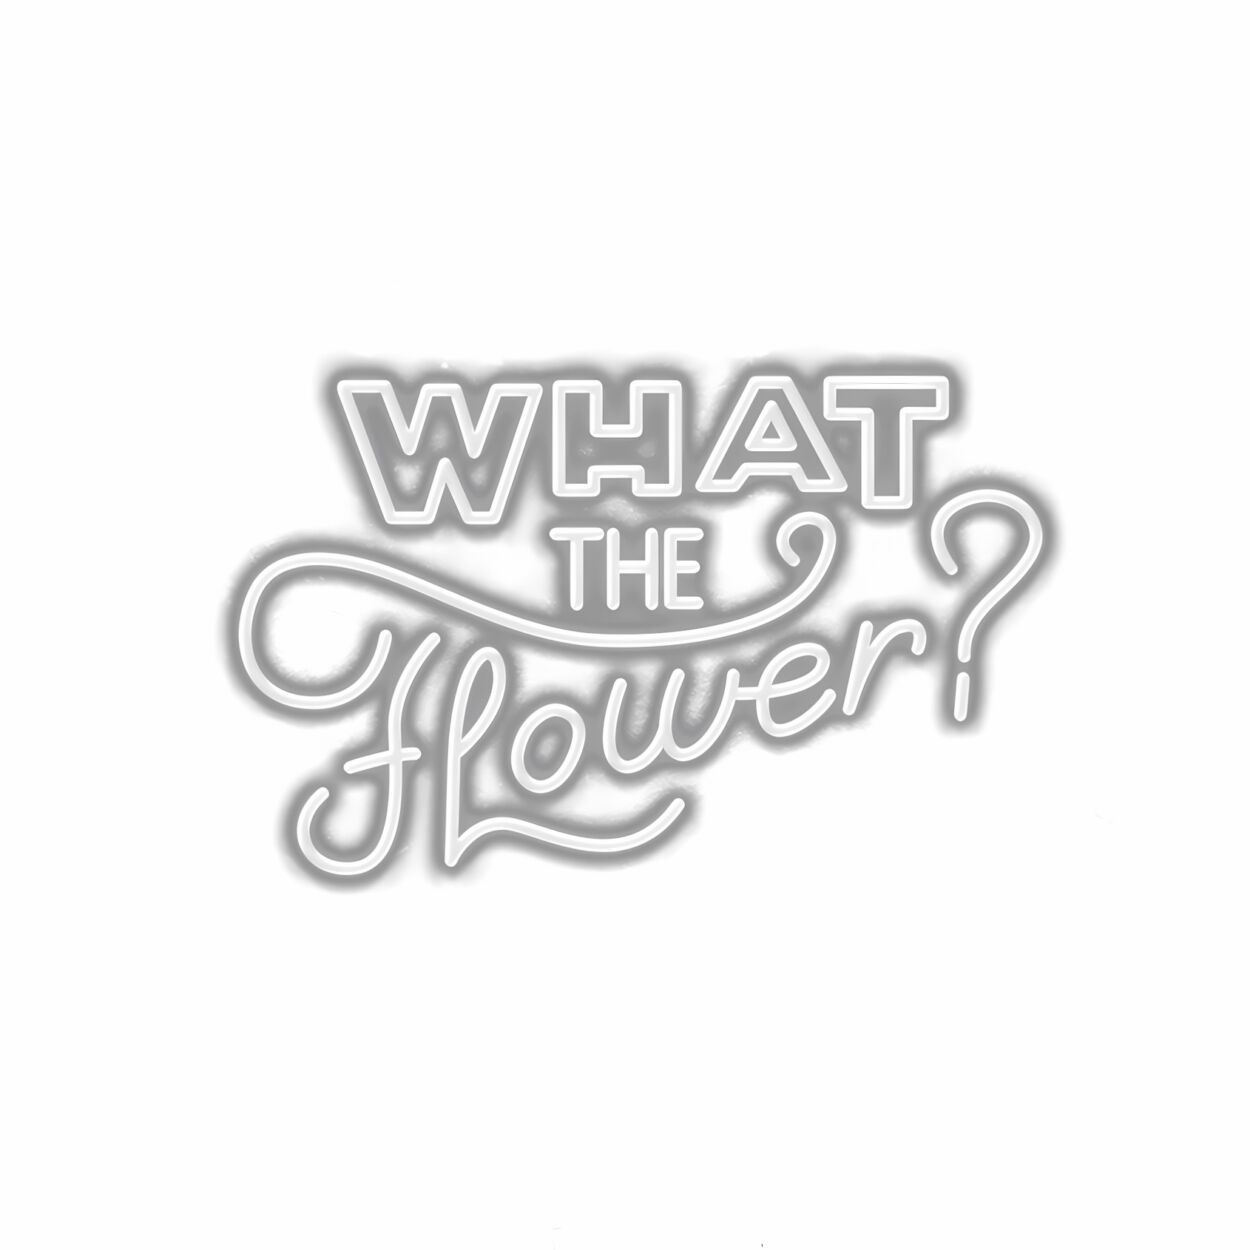 Stylized text saying "What the Flower?